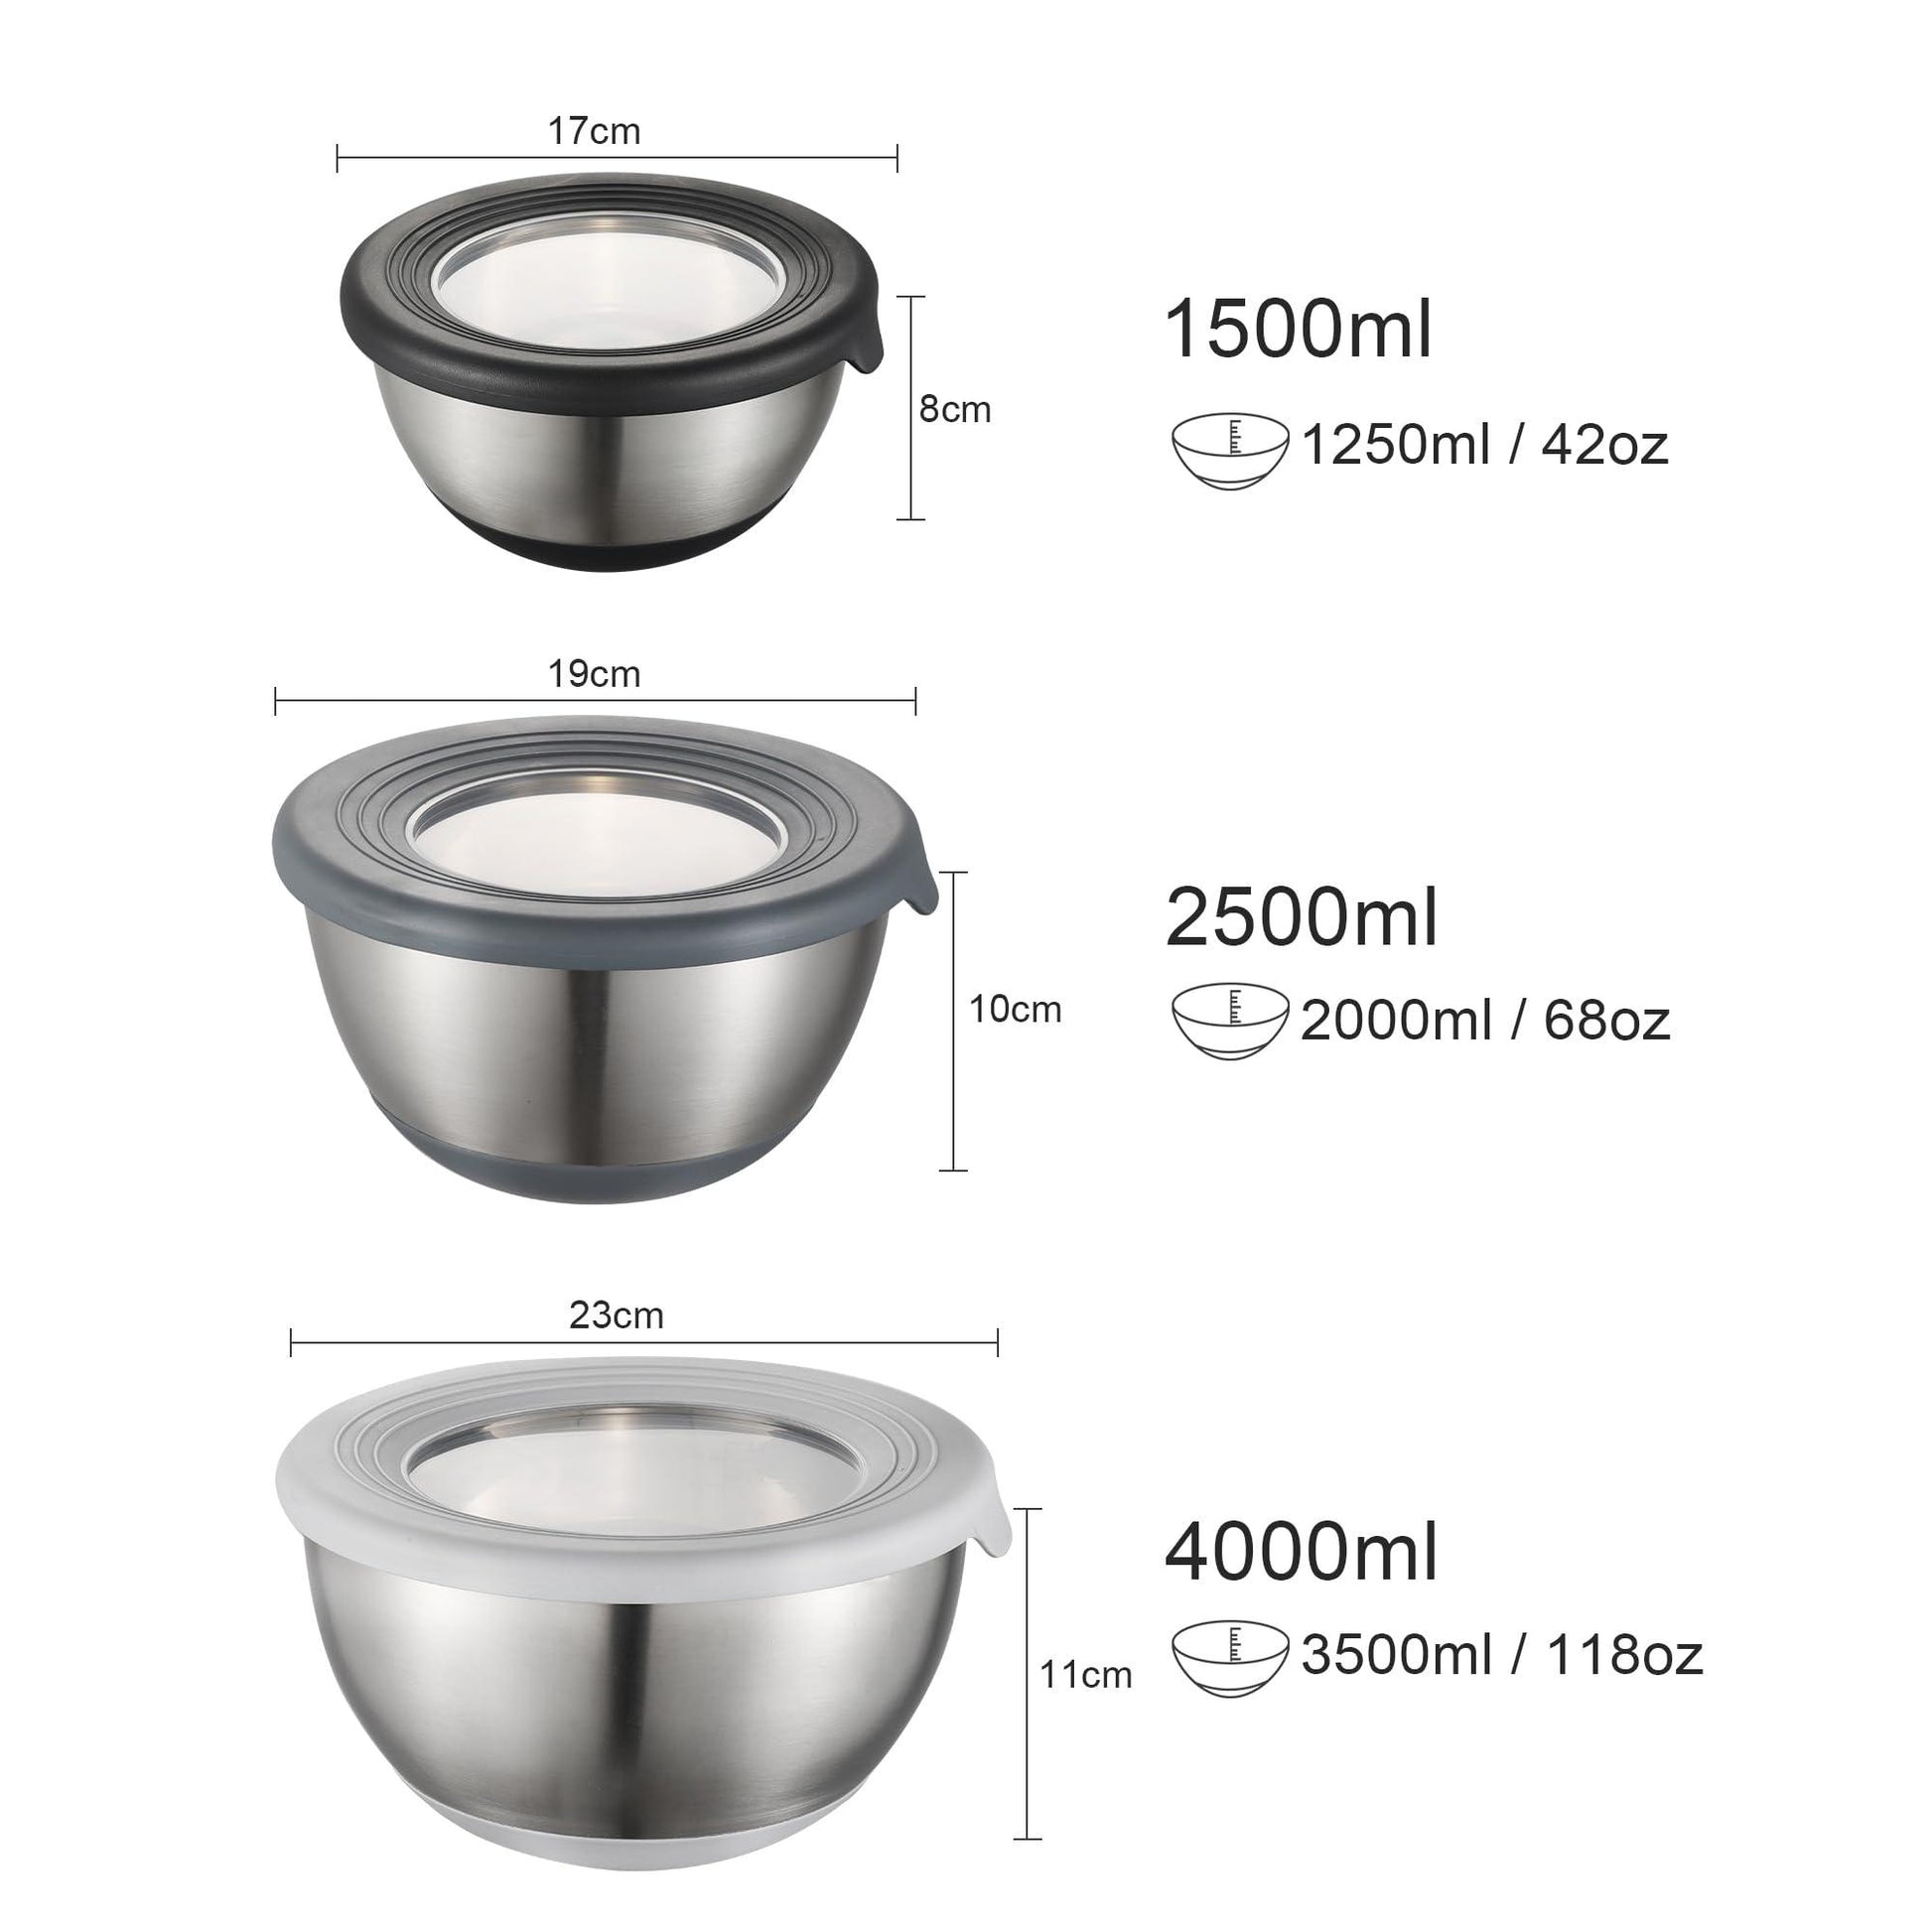 XingXiuSis Mixing Bowl Set with Lids 3 Pieces Stainless Steel Non-slip Mixing Bowl Nesting Metal Bowl Set for Cooking Baking Prepping & Food Storage 1.25/2/ 3QT - CookCave